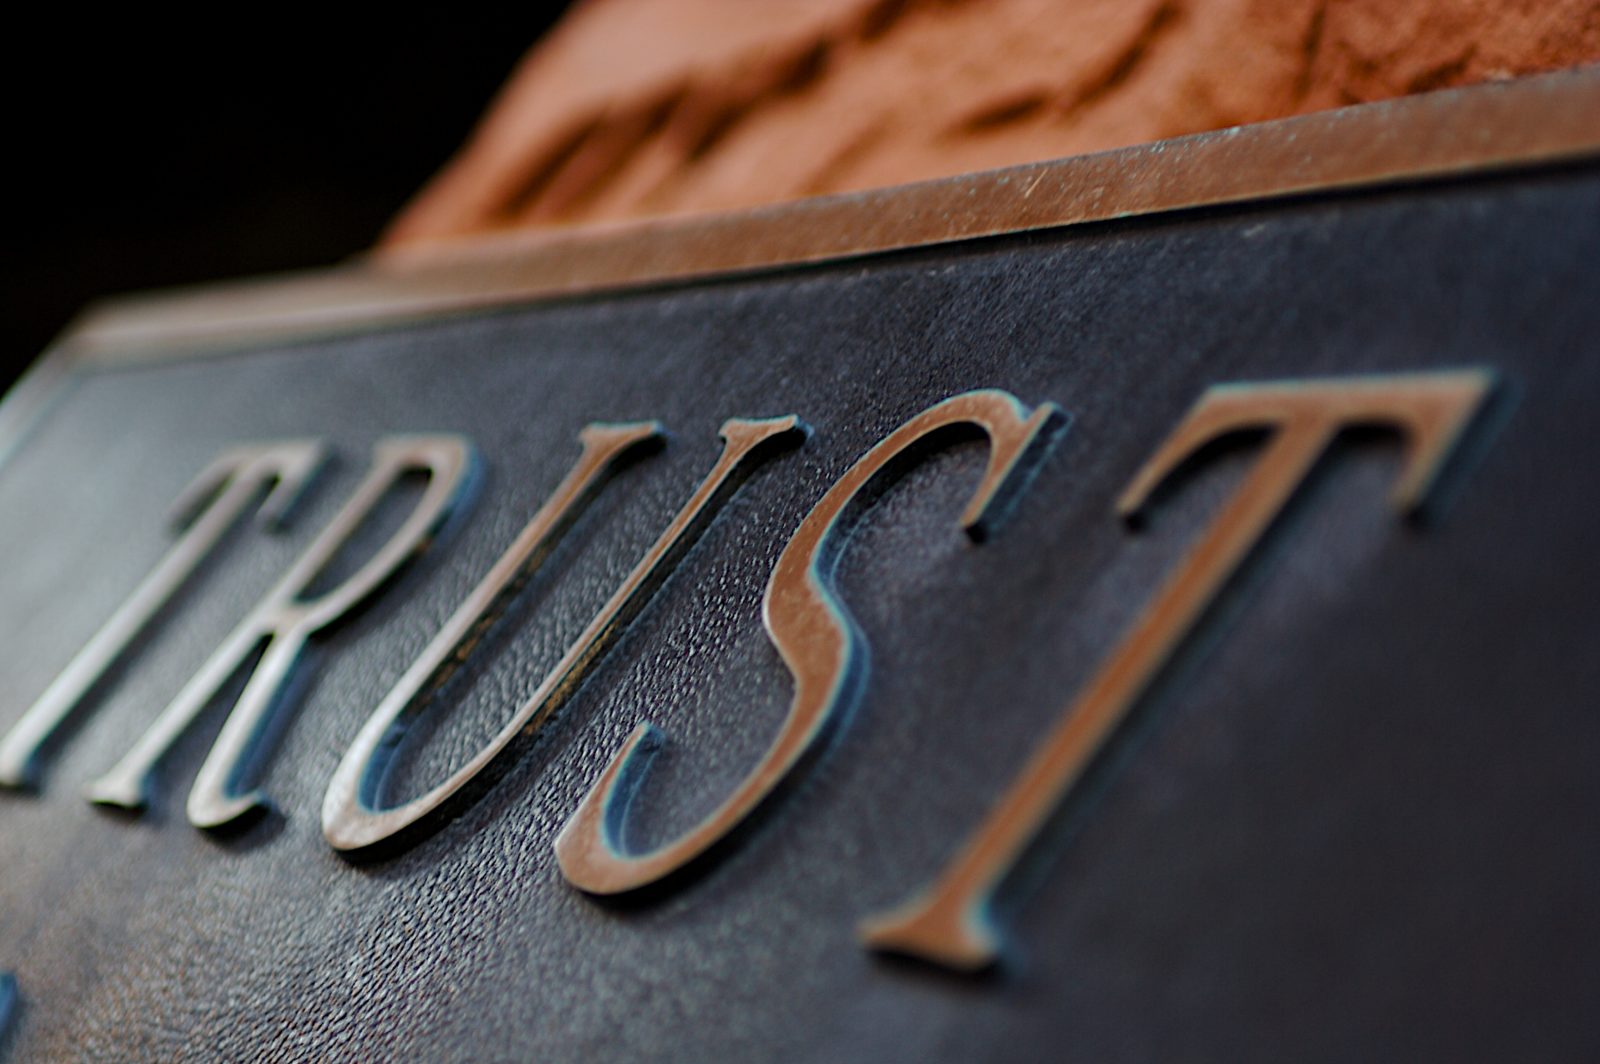 Image of a plaque with trust written